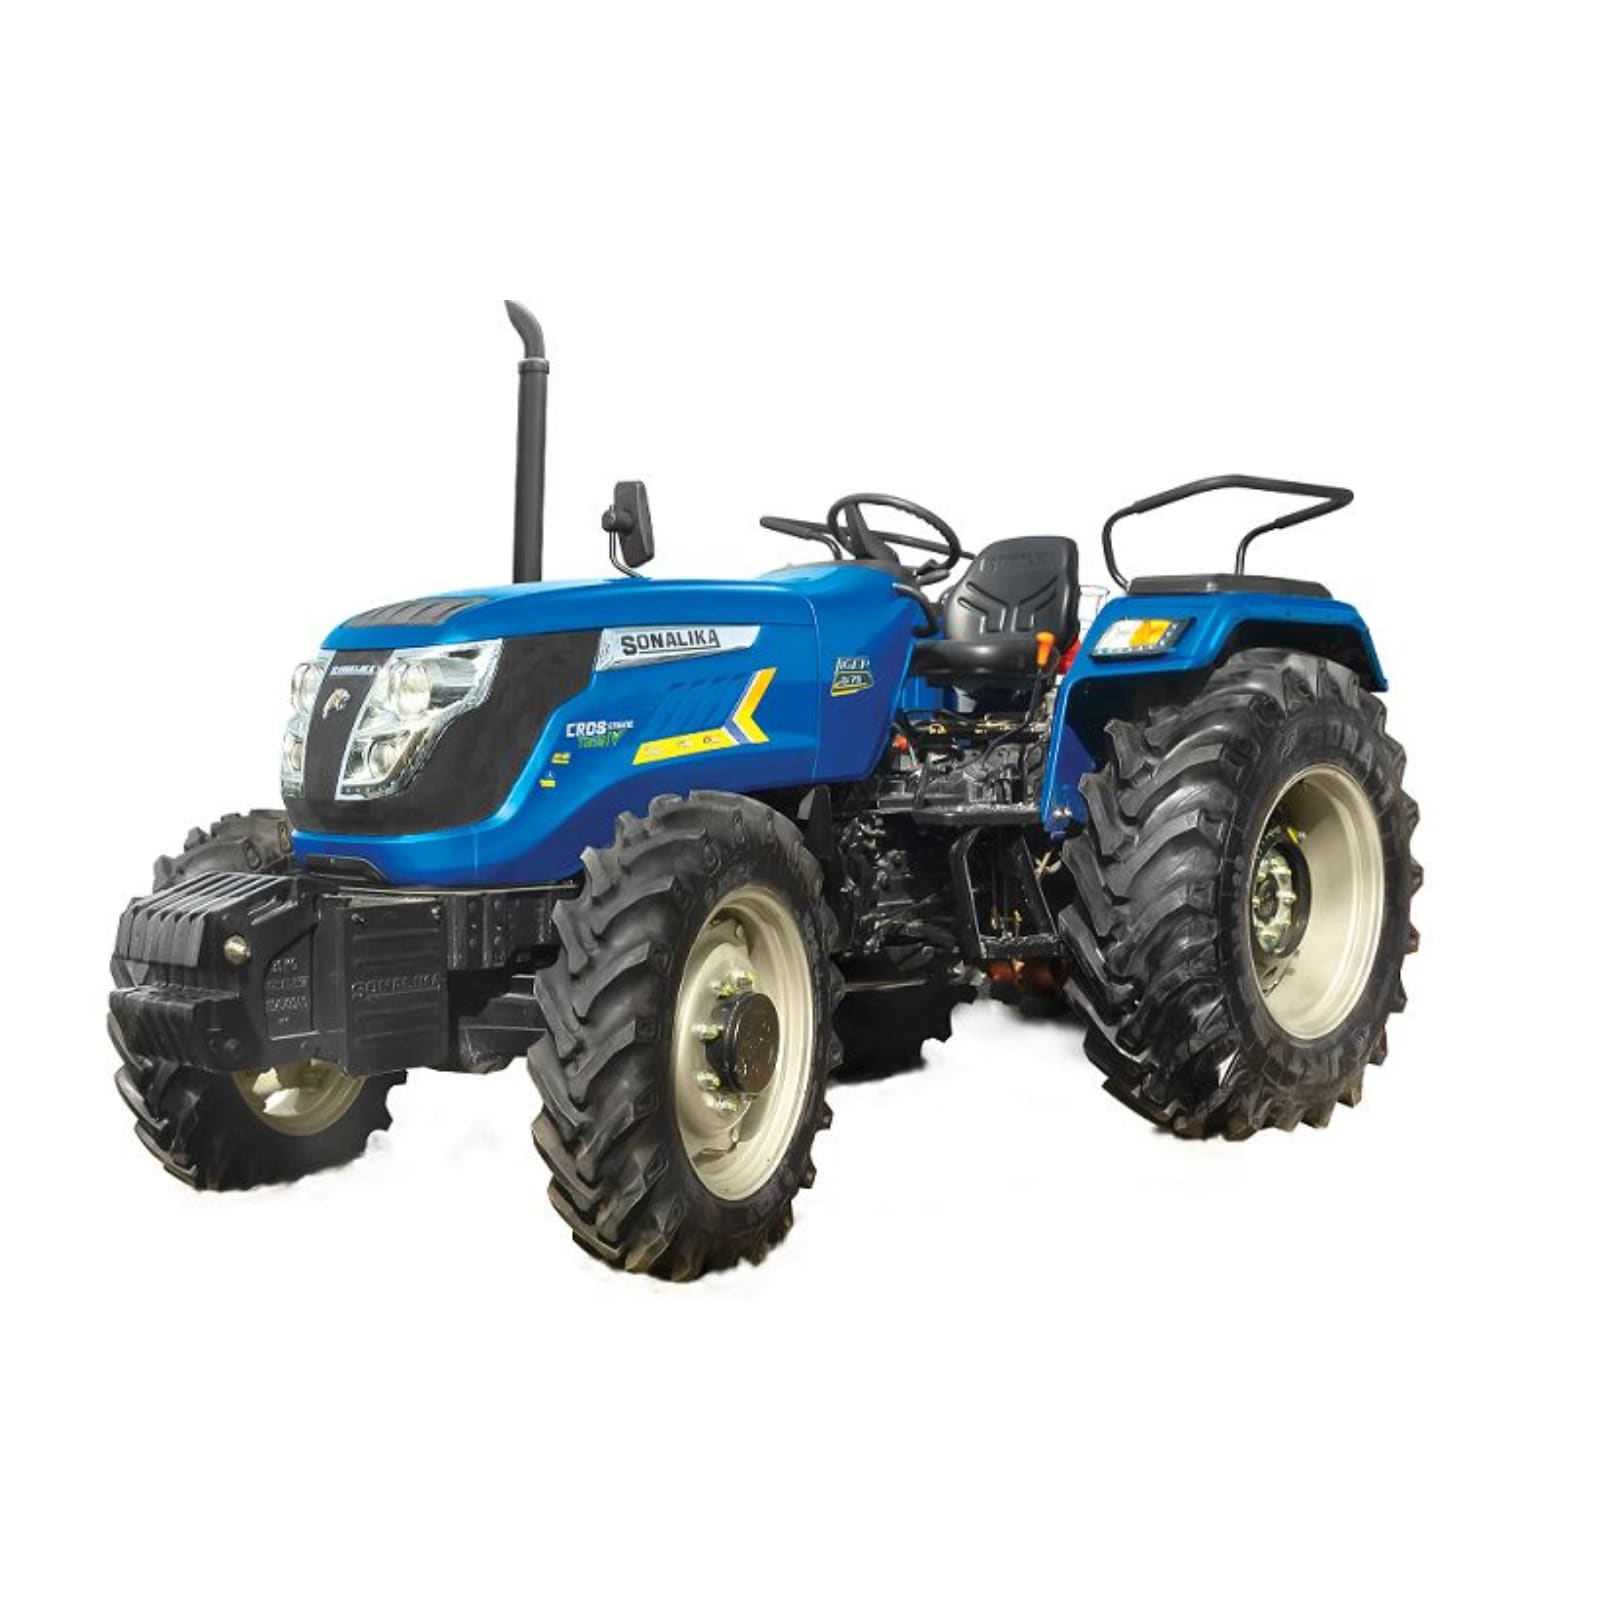 je bent innovatie Tochi boom Sonalika Tiger DI 75 4WD, DI 65 4WD Tractor Launched, Priced From Rs 11 Lakh